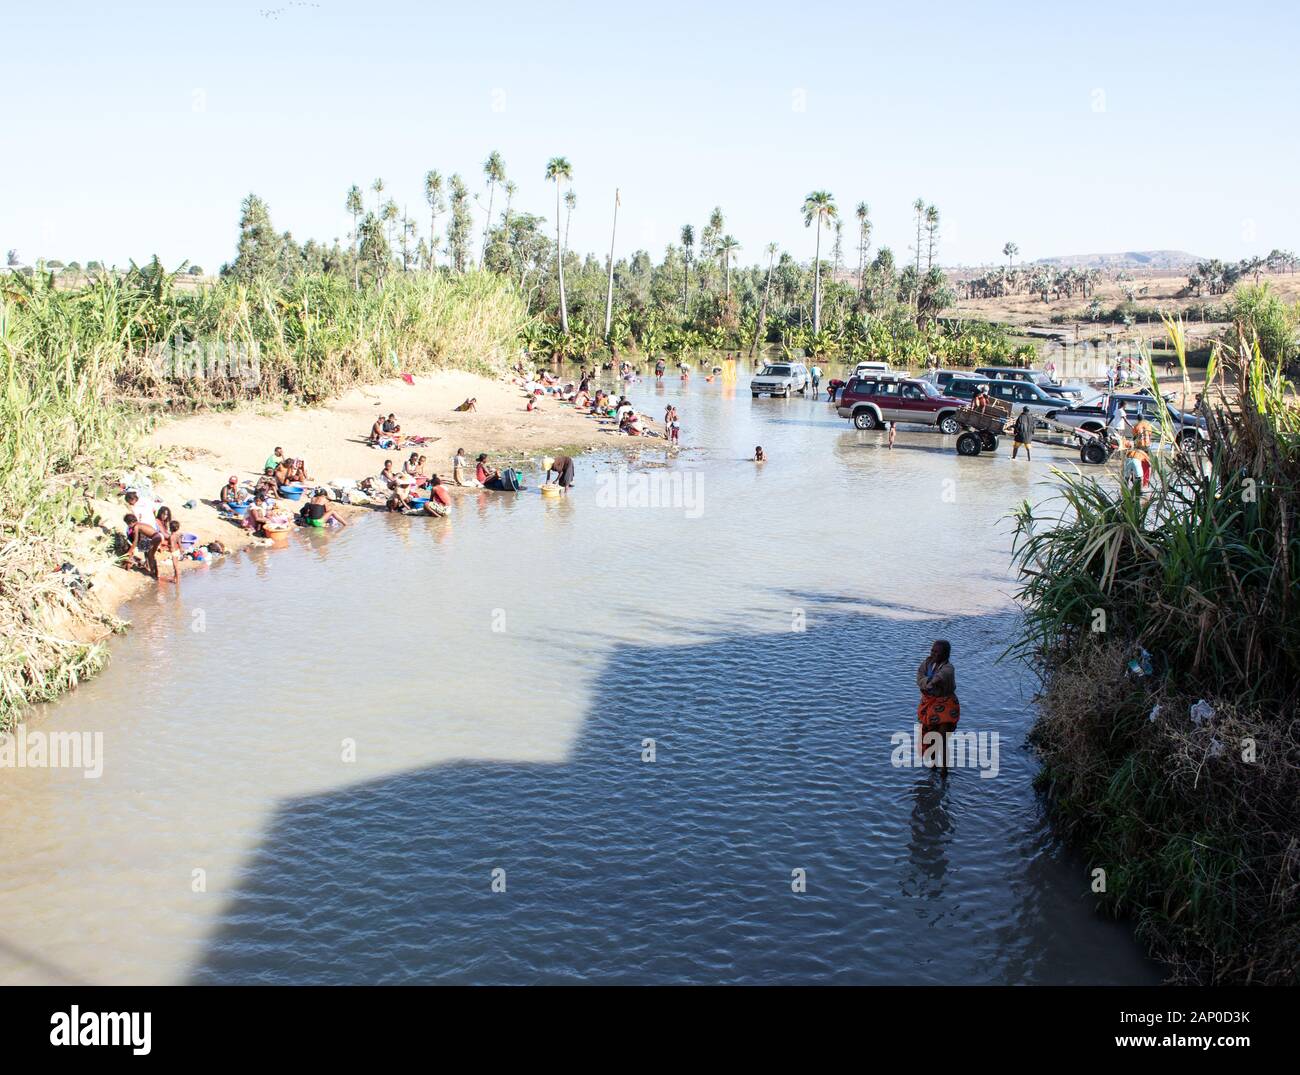 Malagasy people washing clothes in a river in Madagascar Stock Photo